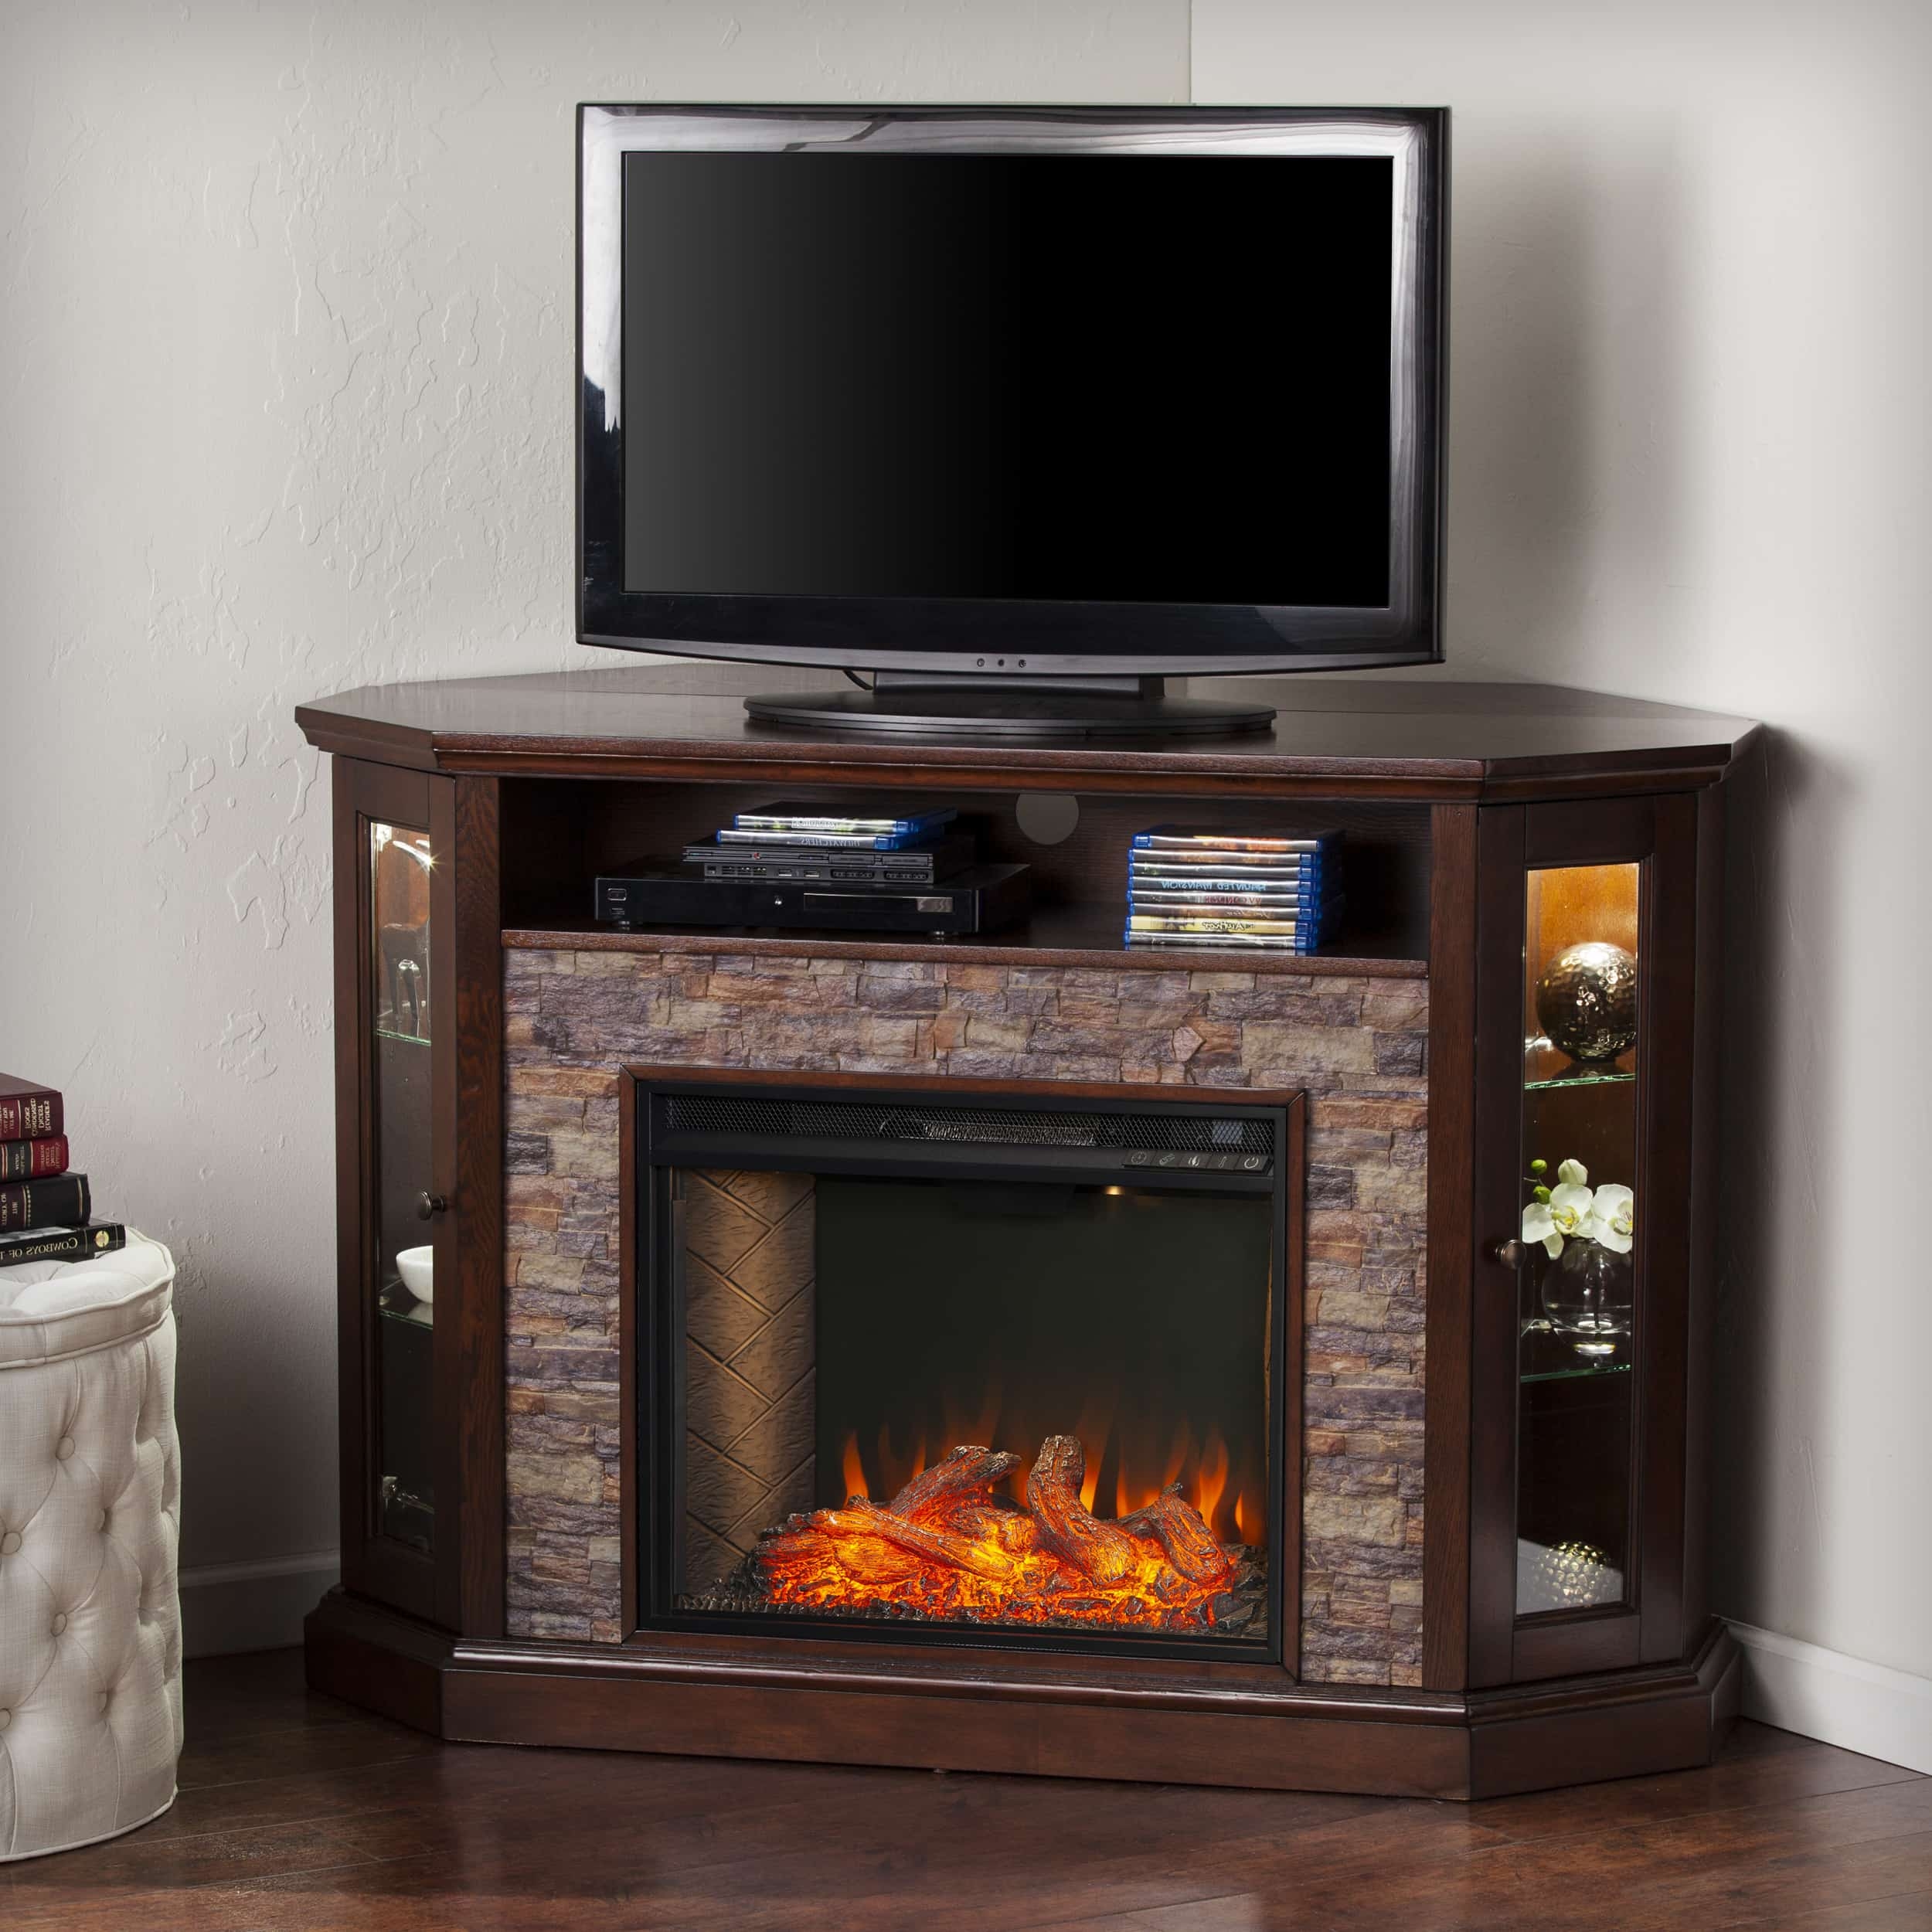 Corner Electric Fireplace Tv Stand, Corner Electric Fireplace Media Cabinet